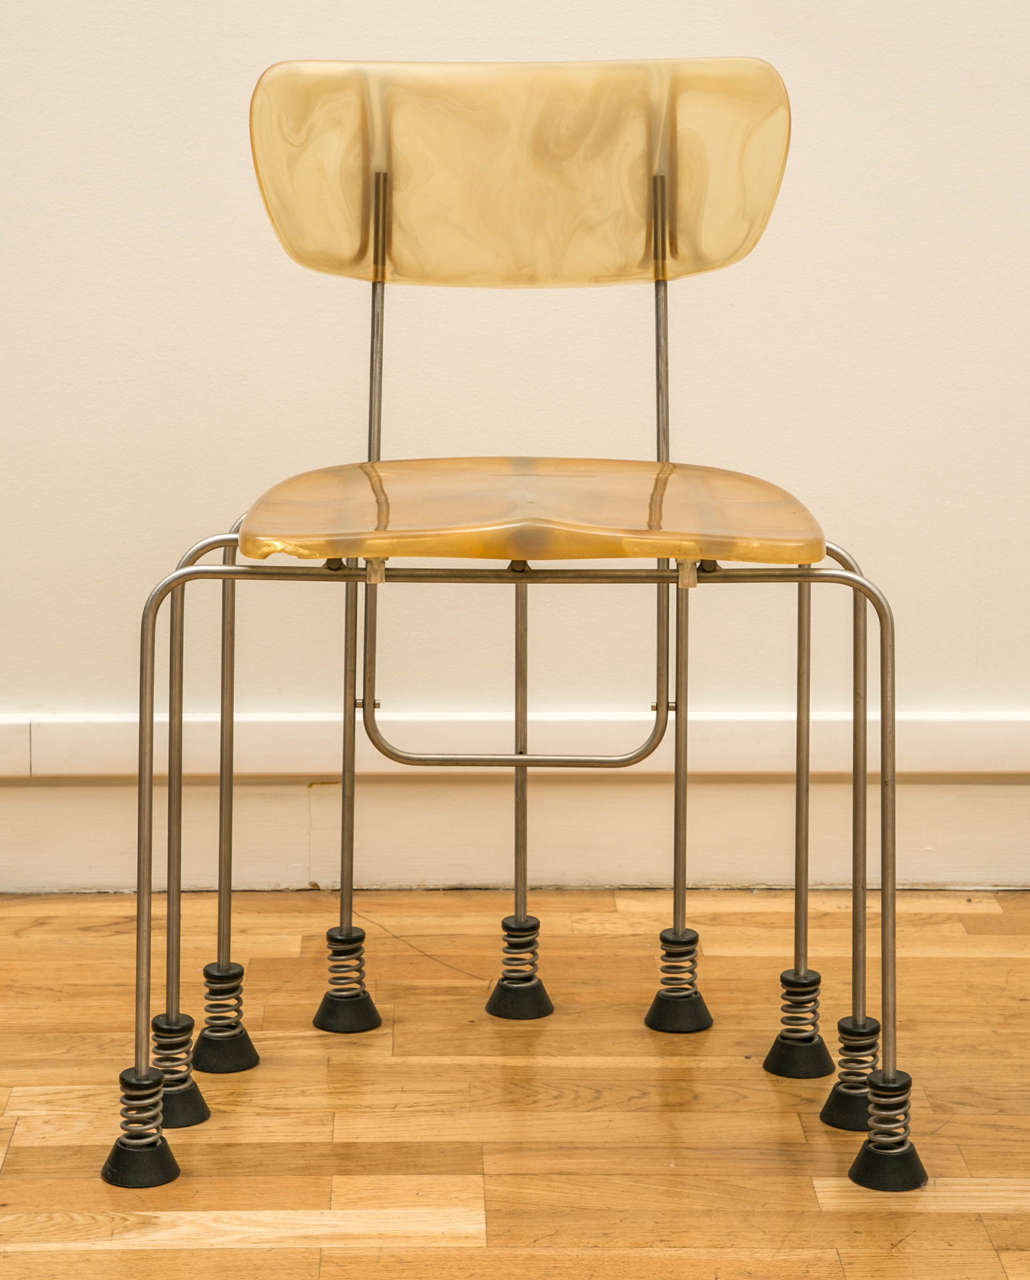 Broadway chair with nine feet by Gaetano Pesce, edited by Bernini.

Stainless steel studs on springs, seat and back in translucent resin with marble  effect. The resin mixture used by the manufacturer craftsman makes each chair a unique model.